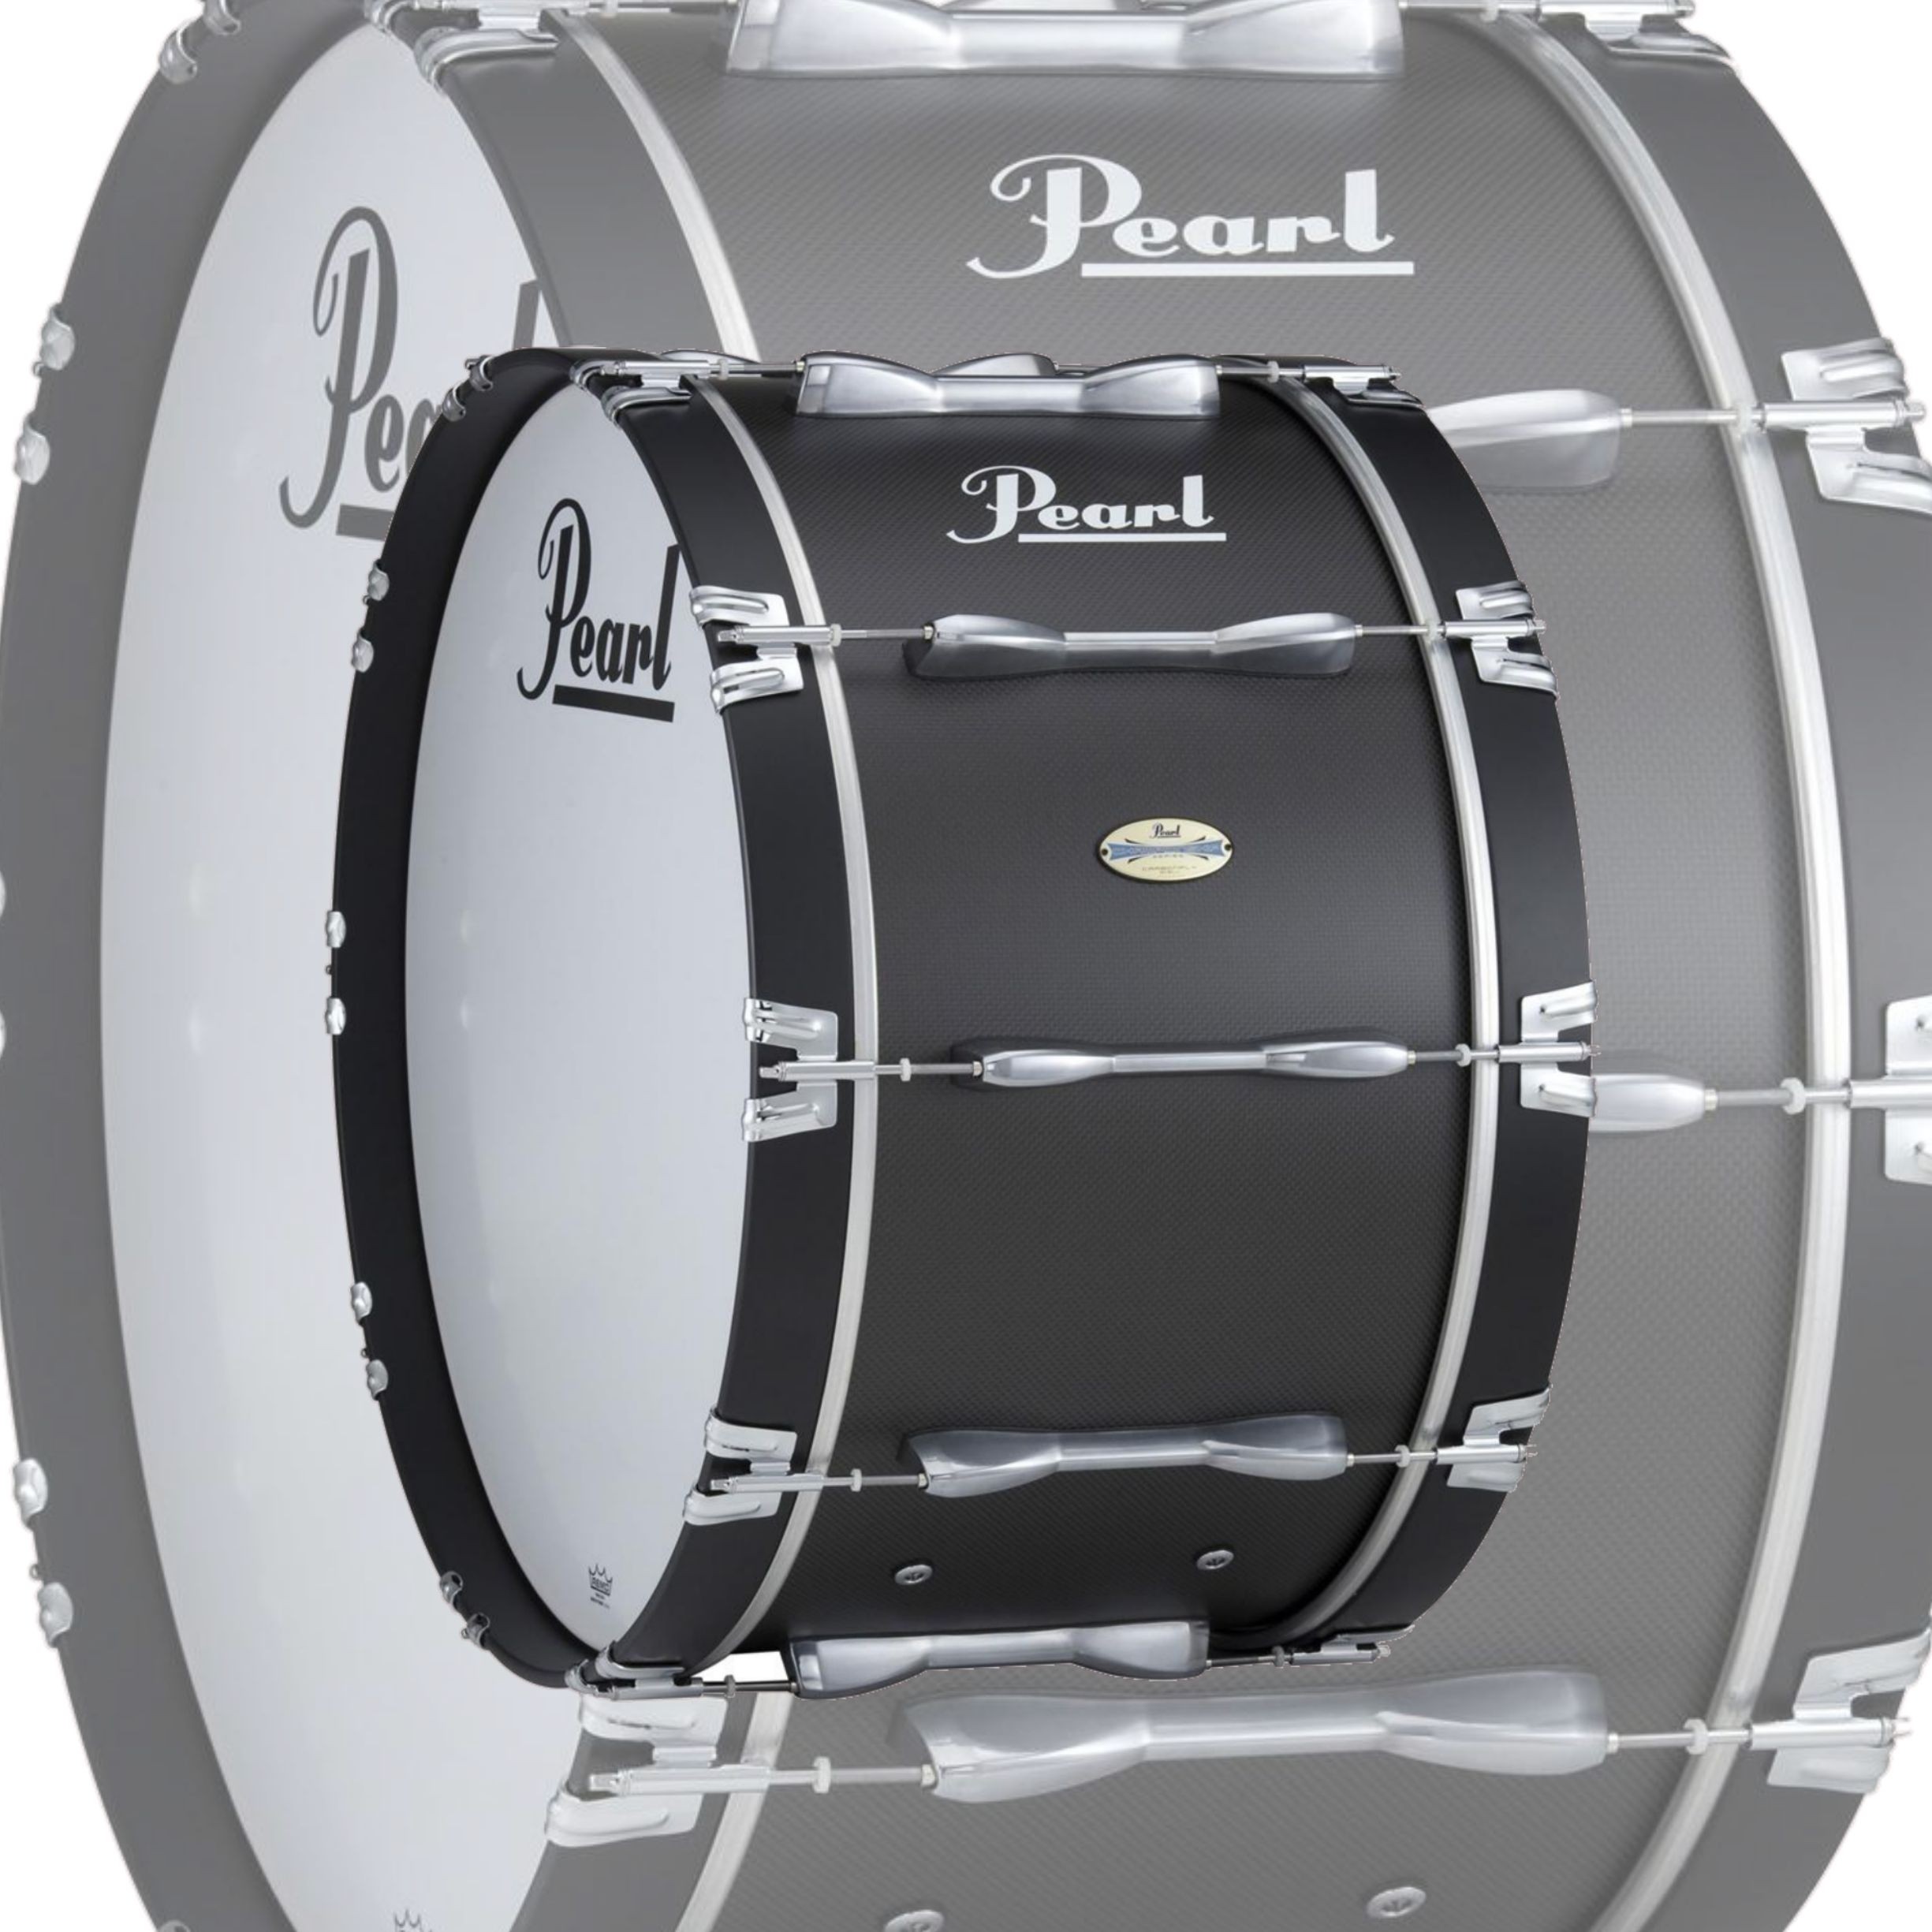 Pearl CarbonPly Championship 14"x14" Marching Bass Drum